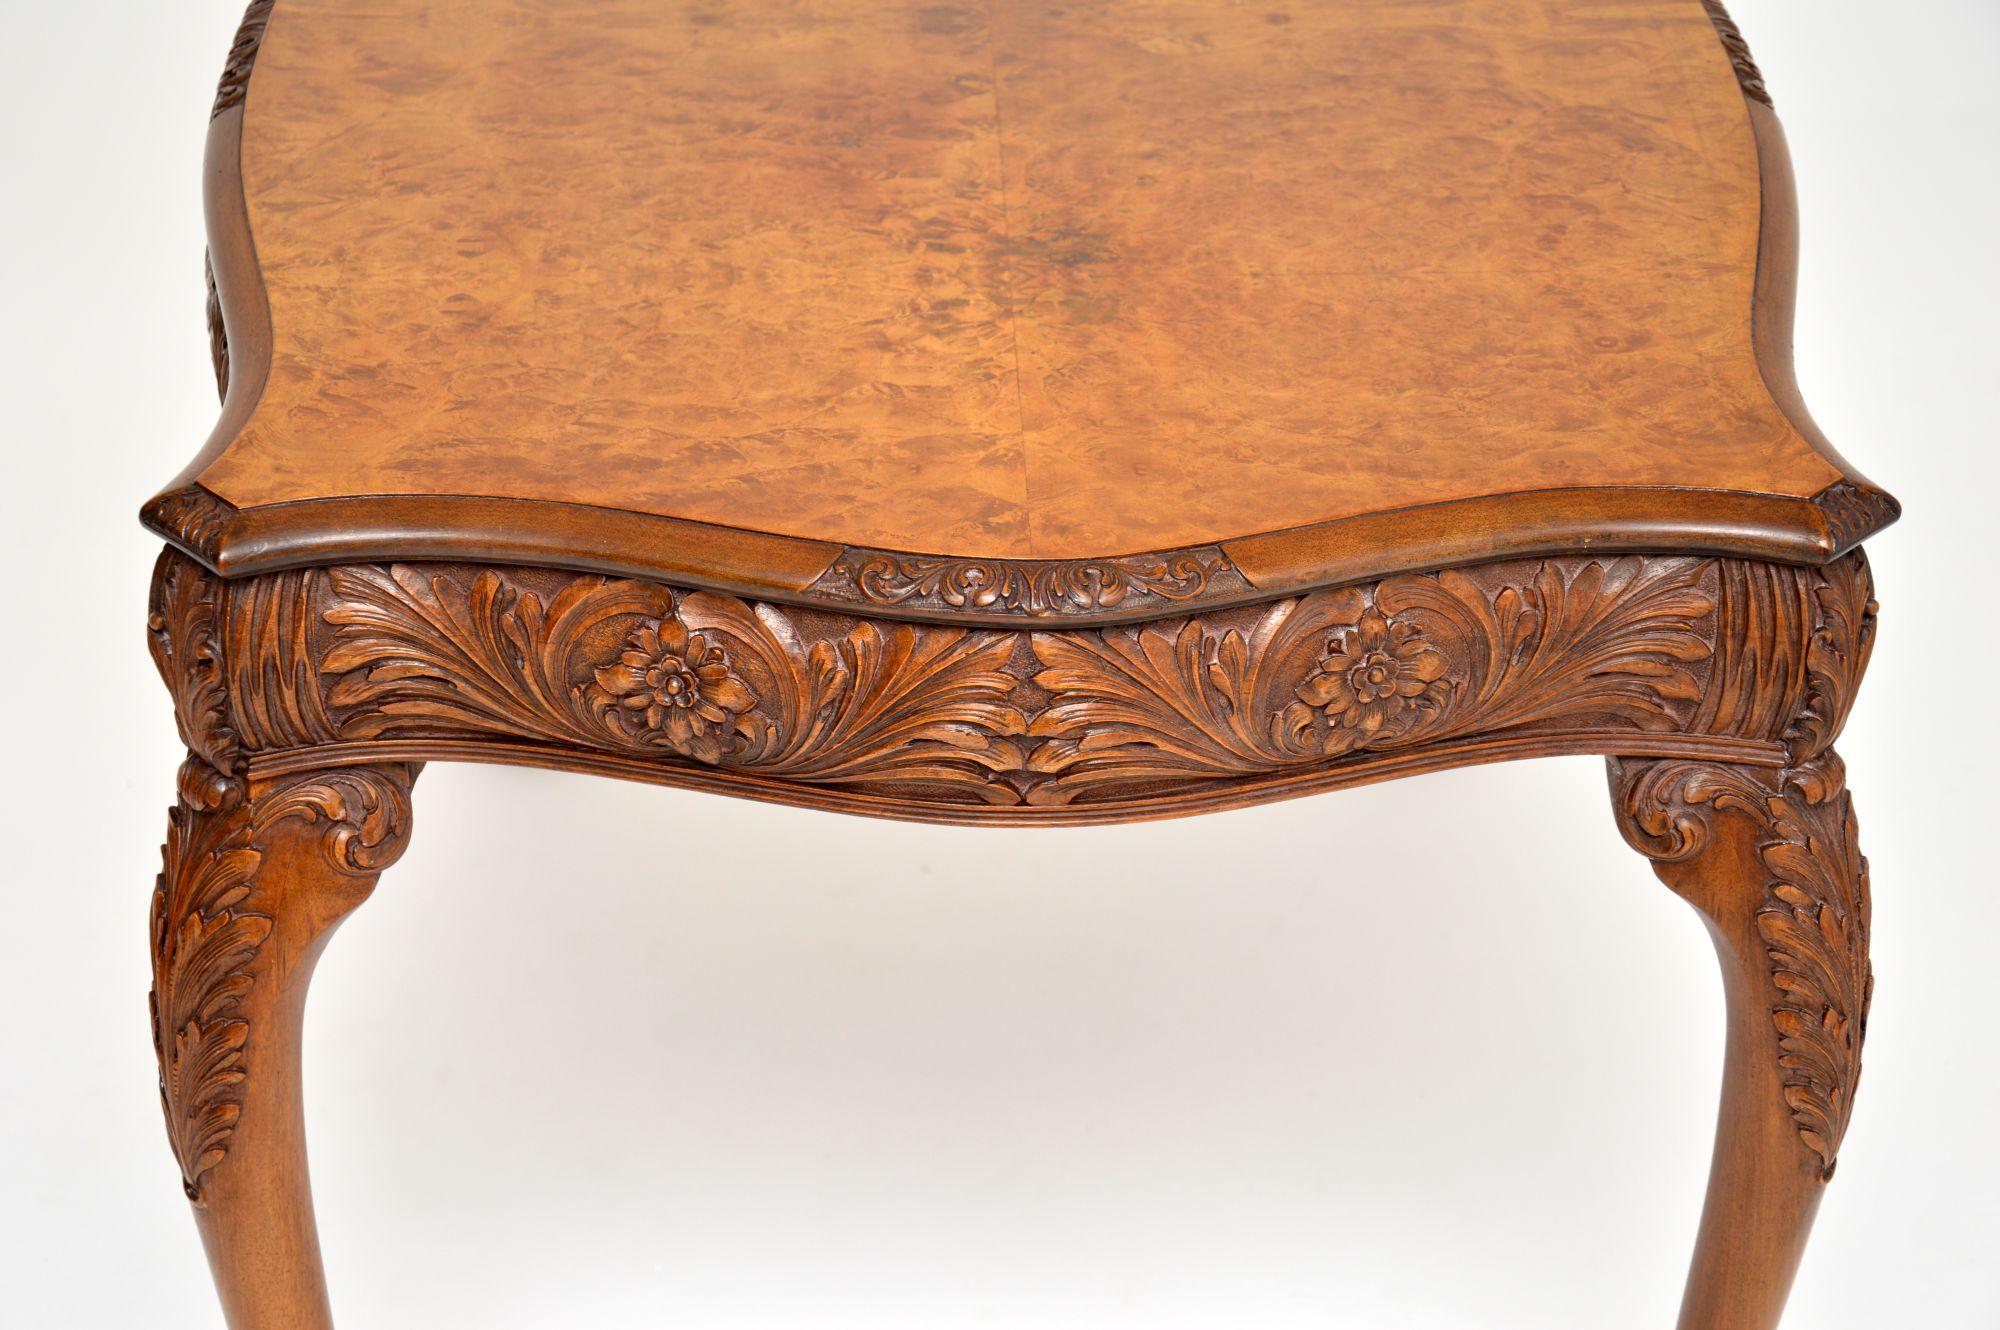 20th Century Antique Burr Walnut Occasional Table or Desk